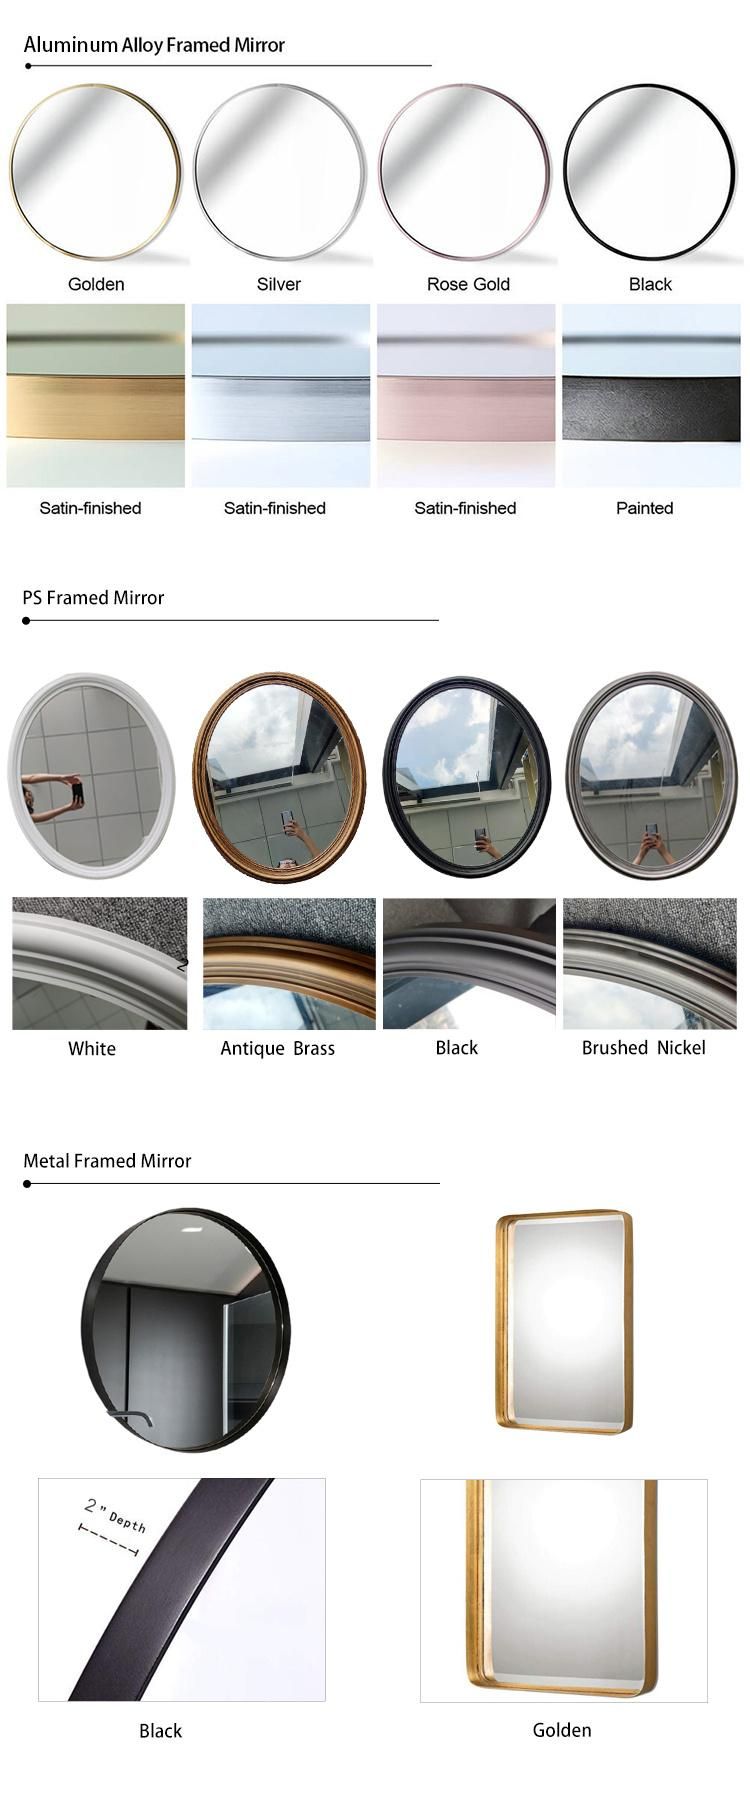 Wall-Mounted Large Round Mirror Decorative Make-up Framed Mirror with Black Frame for Bedroom, Bathroom Entryway and Dining Room